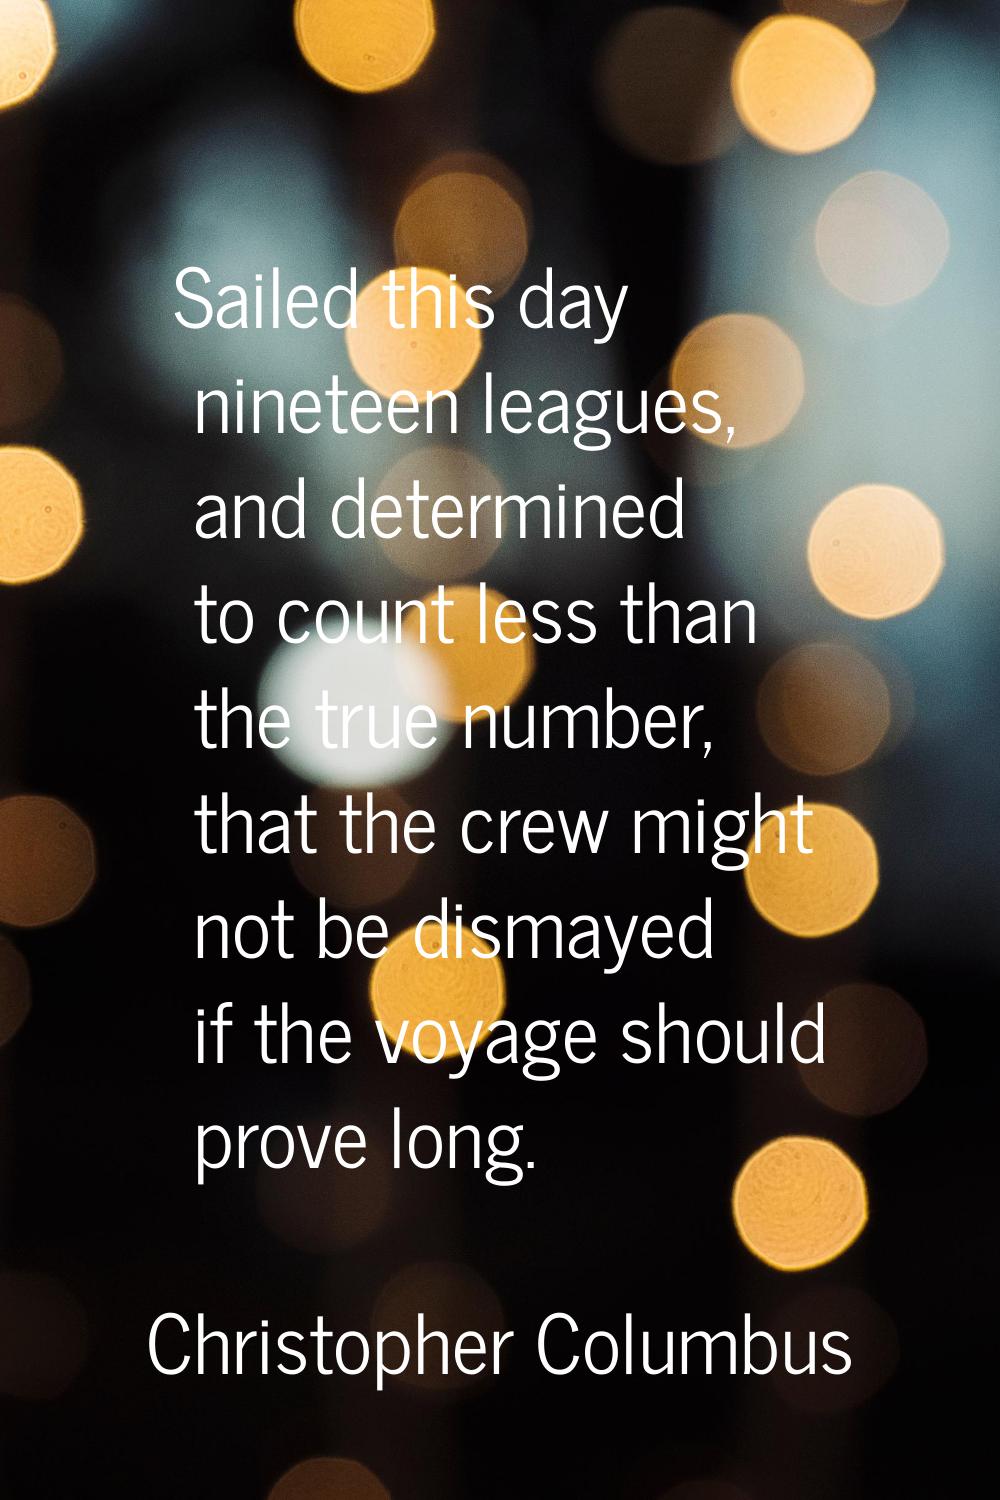 Sailed this day nineteen leagues, and determined to count less than the true number, that the crew 